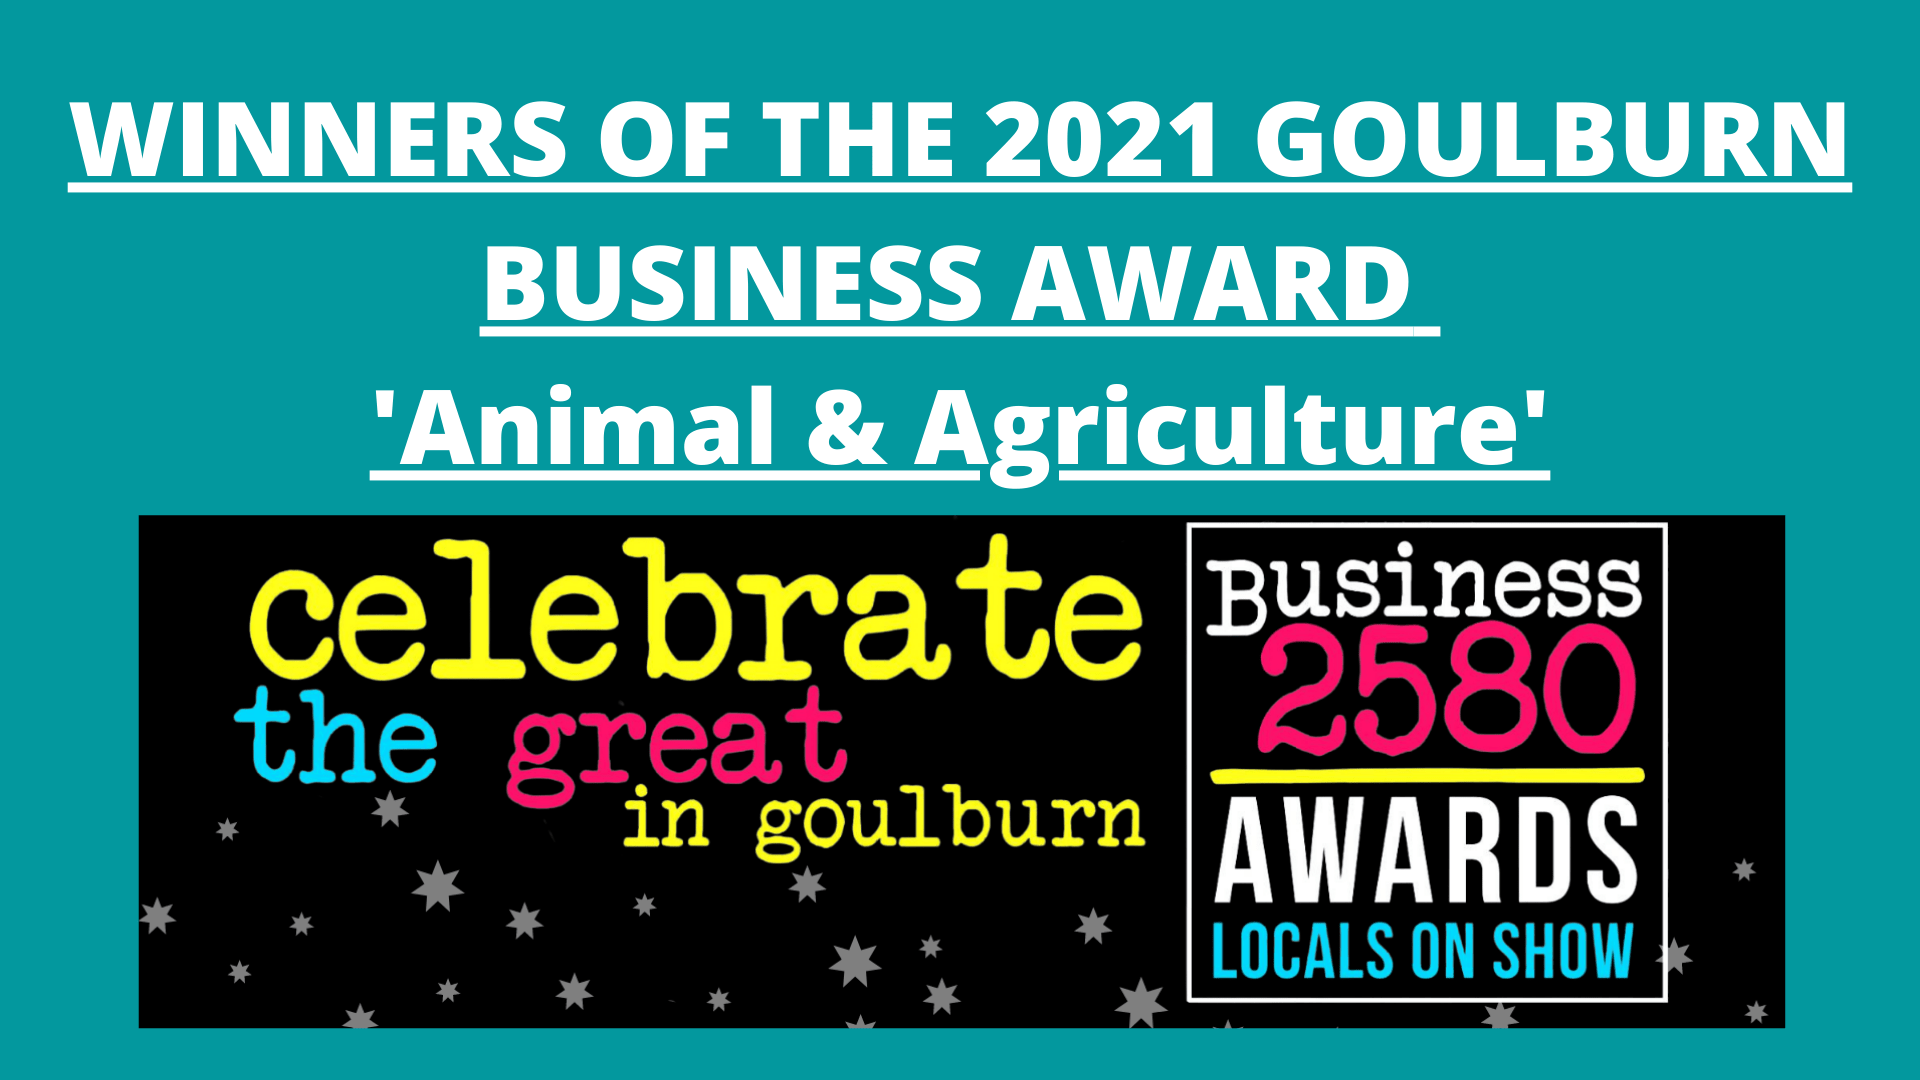 WINNERS OF THE 2021 GOULBURN BUSINESS AWARD 'Animal & Agriculture'